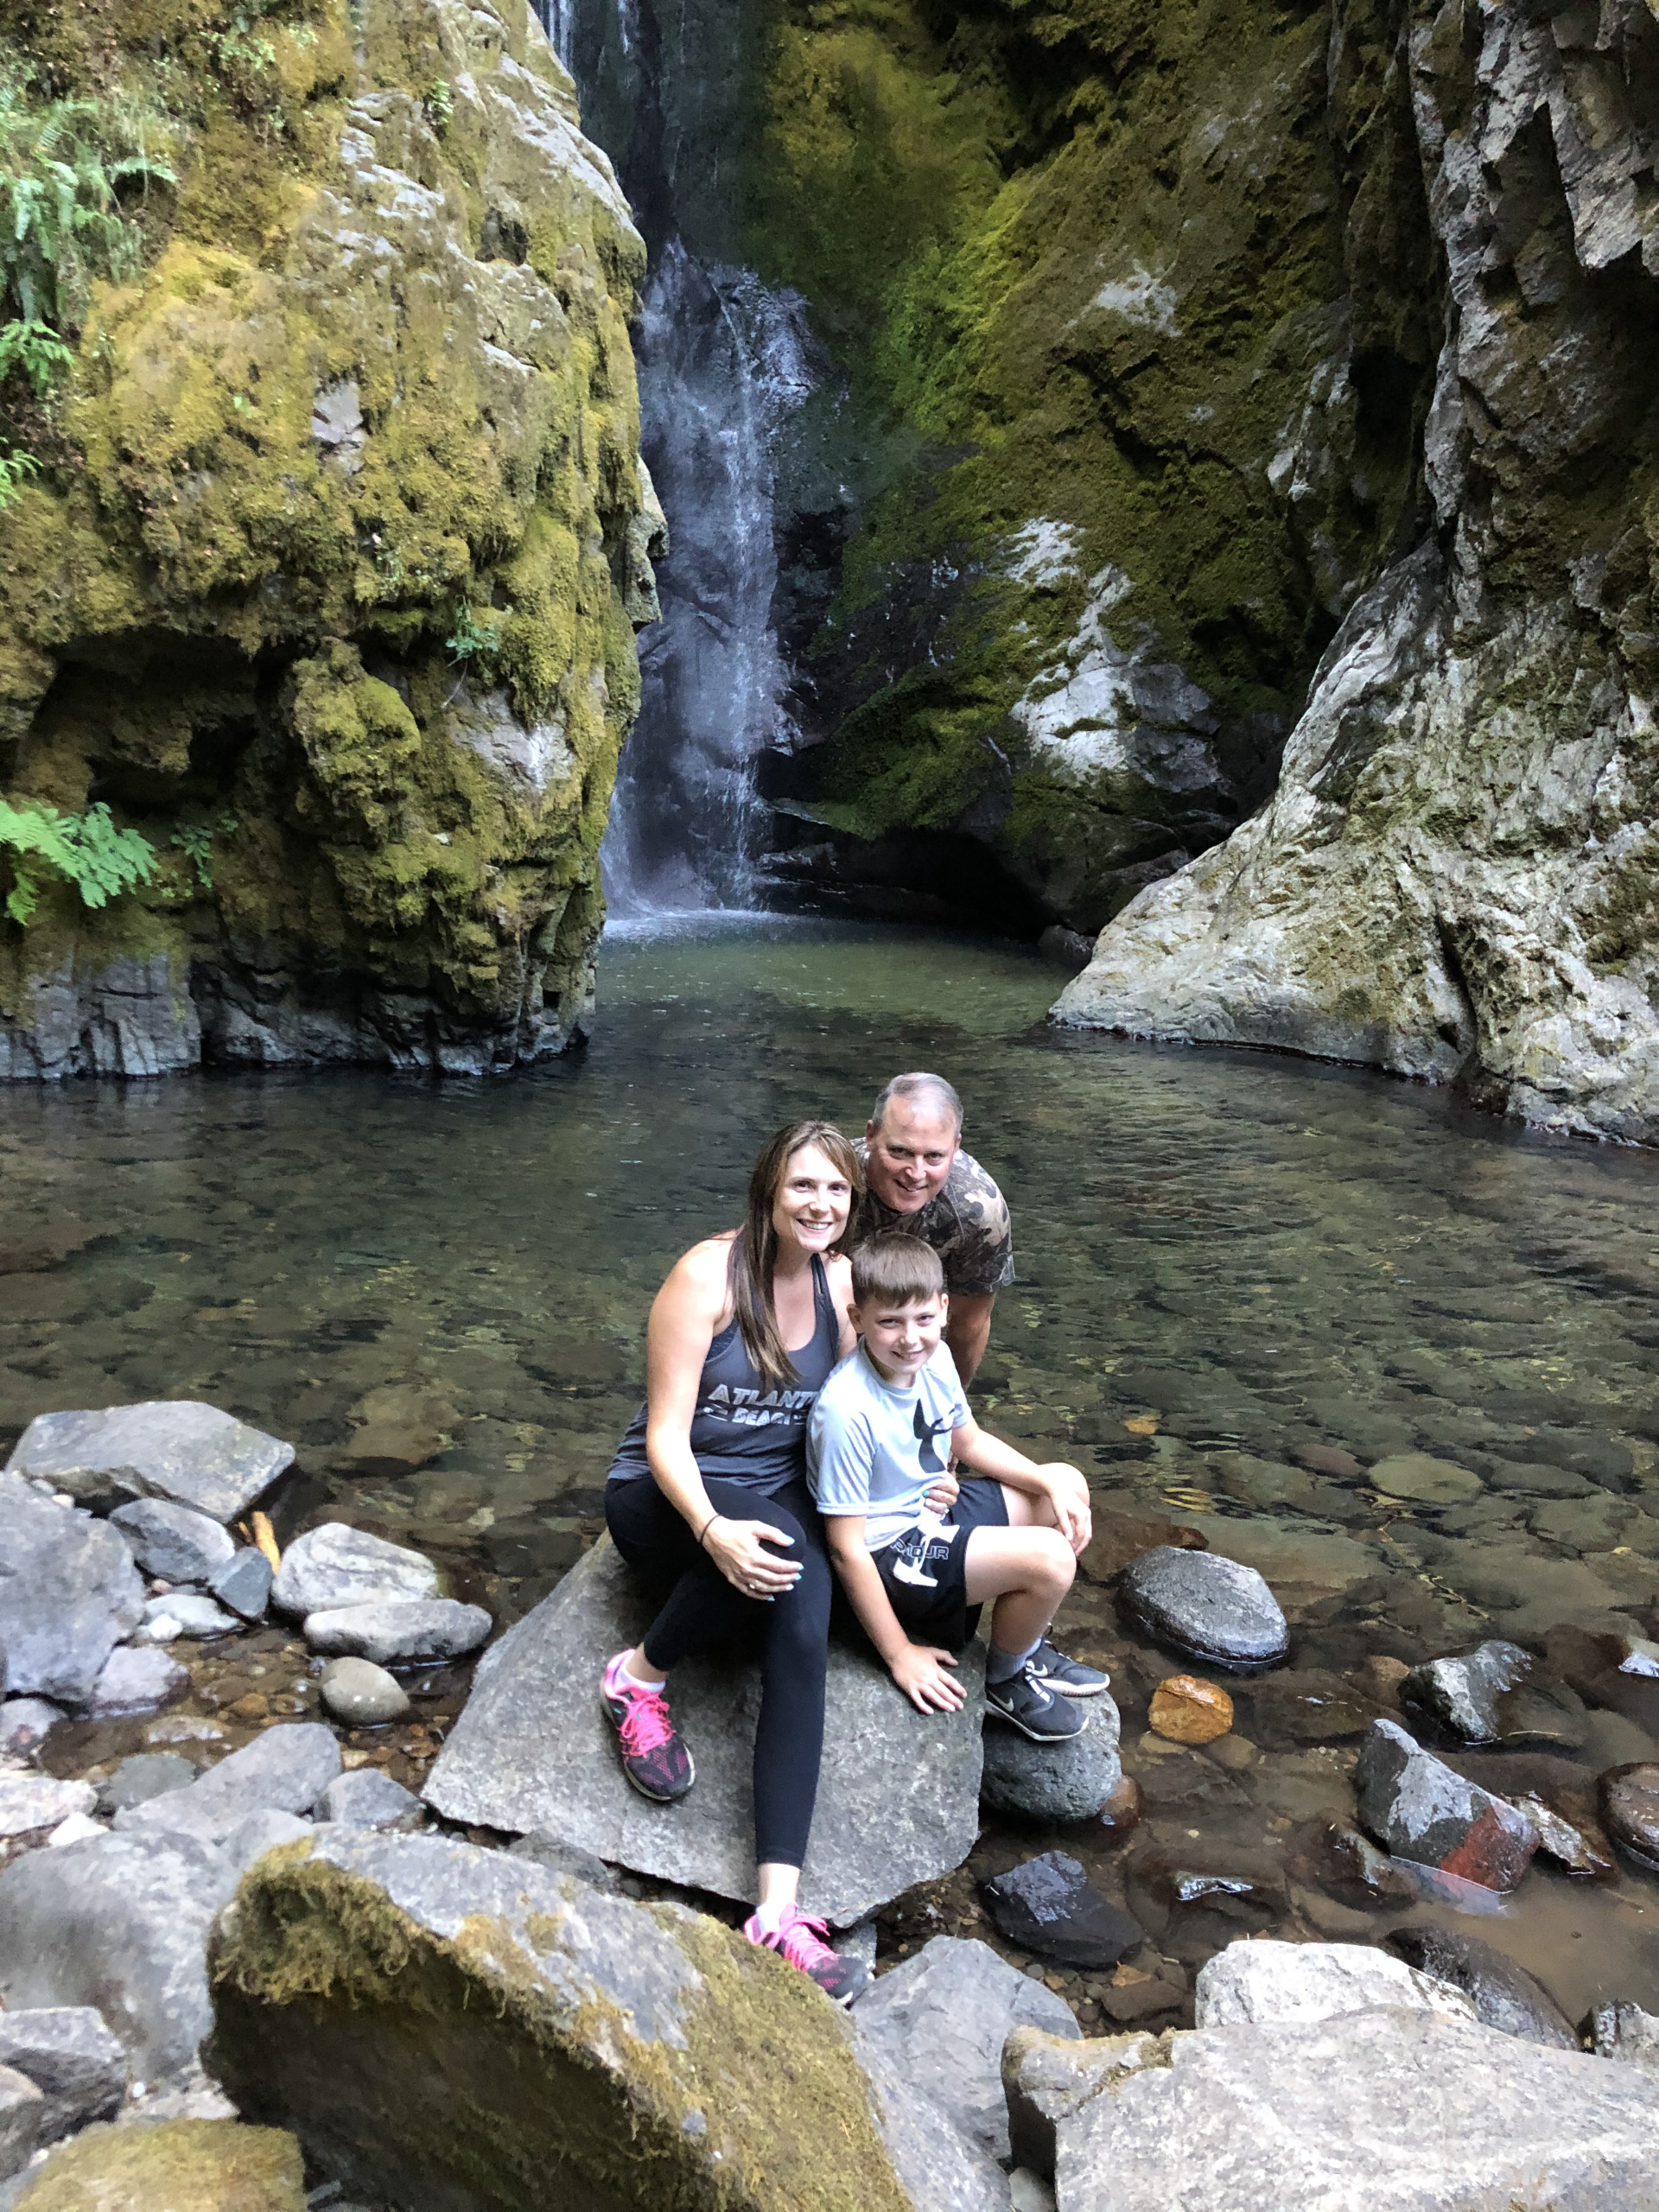 Image of Zack Allen with his wife and youngest son while hiking the Cascades.